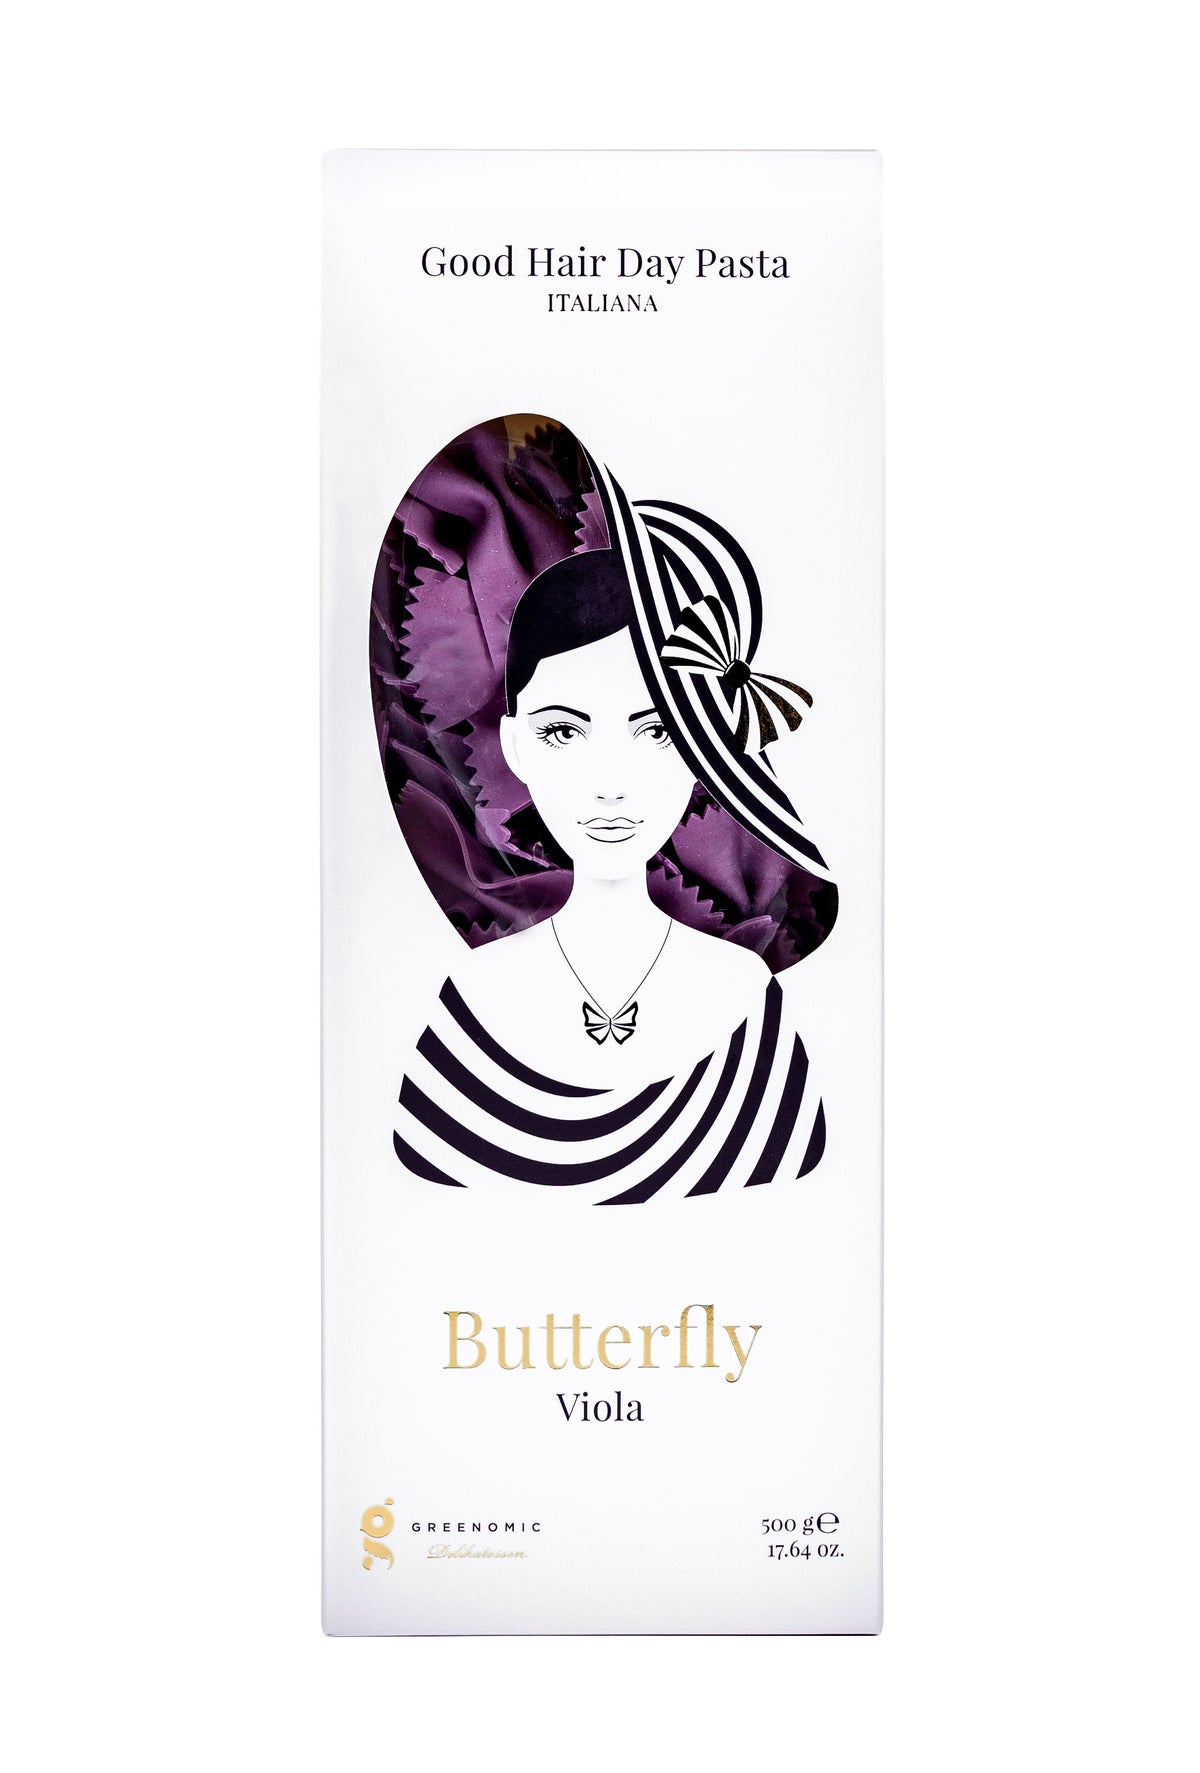 Good Hair Day Pasta Butterfly Viola